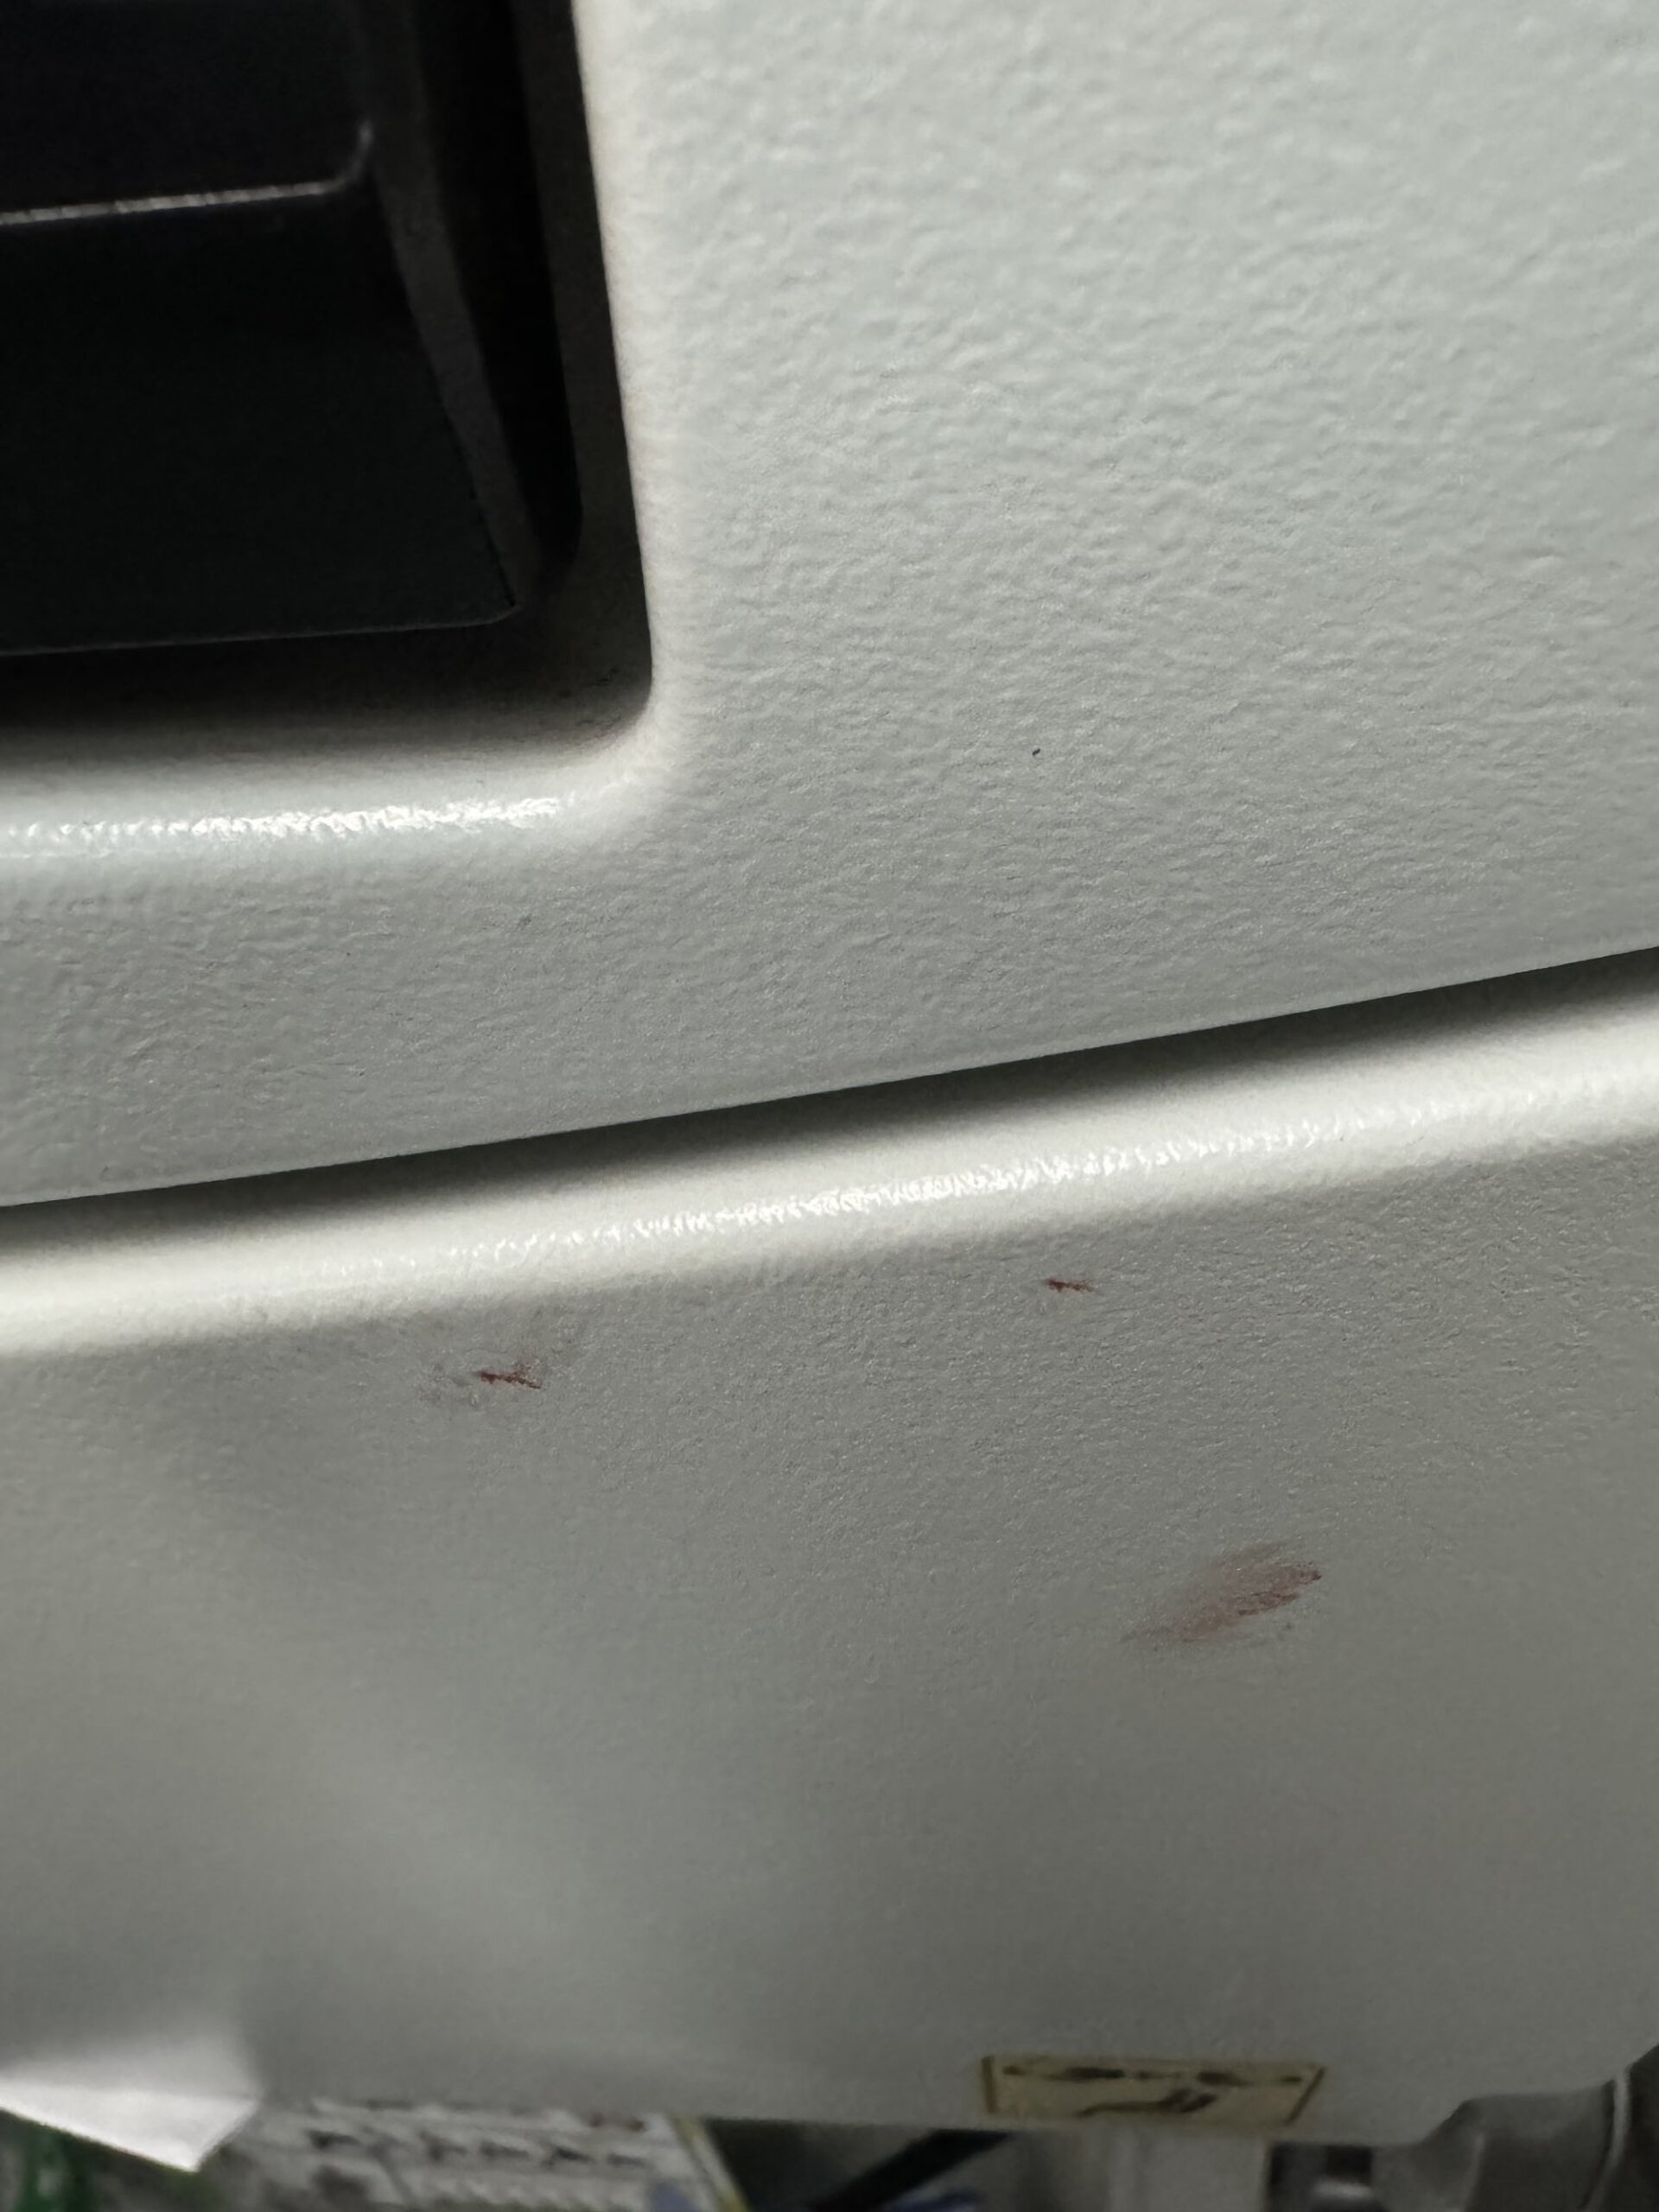 Read more about the article Passenger Finds Bloodstains On Seat During Flight And Is Told To Clean Them Herself